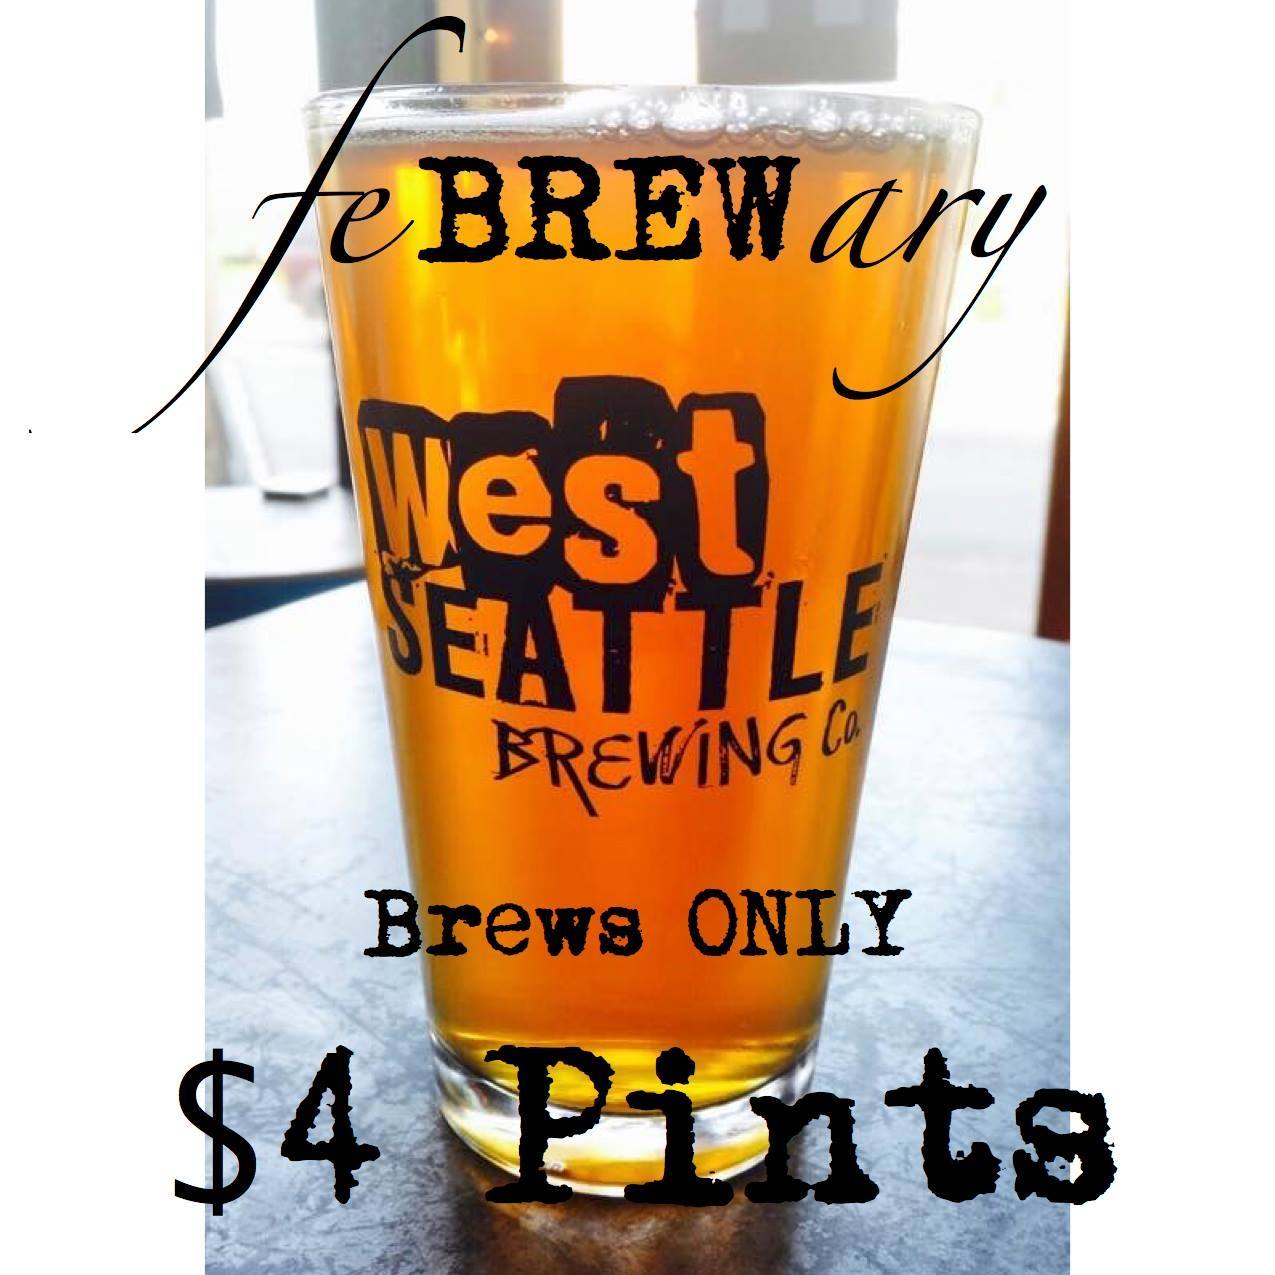 West Seattle Brewing Company